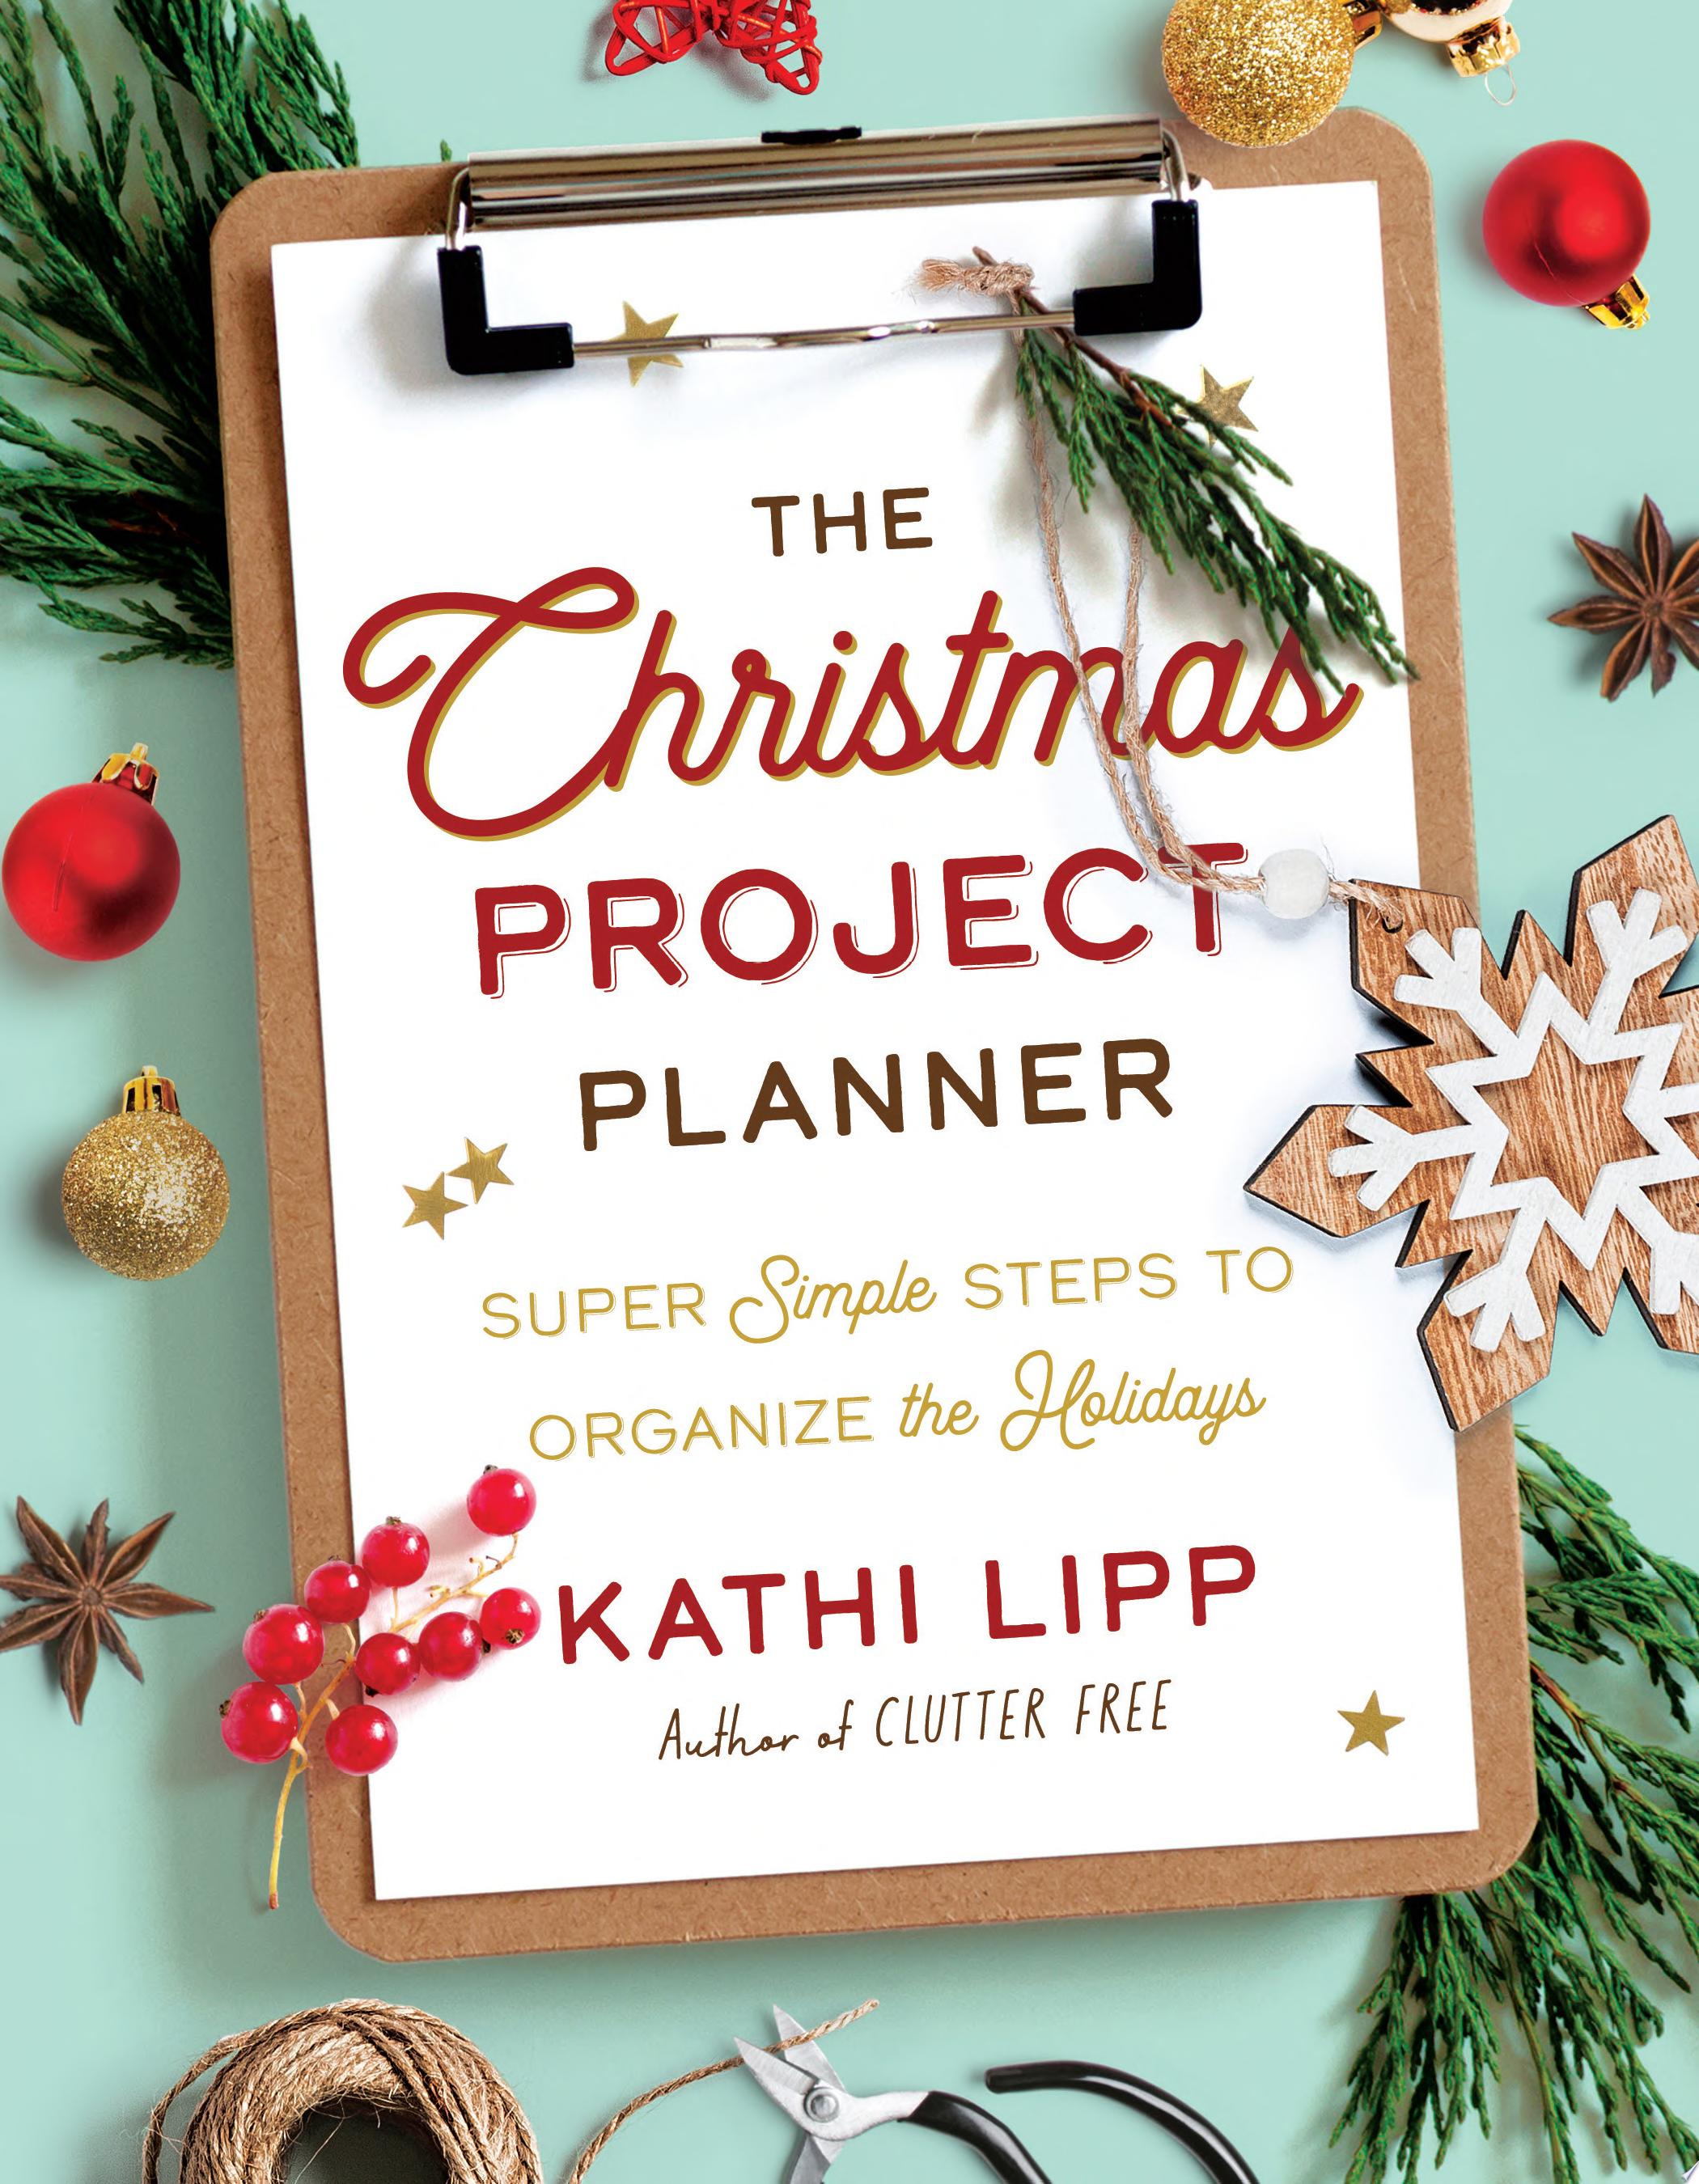 Image for "The Christmas Project Planner"